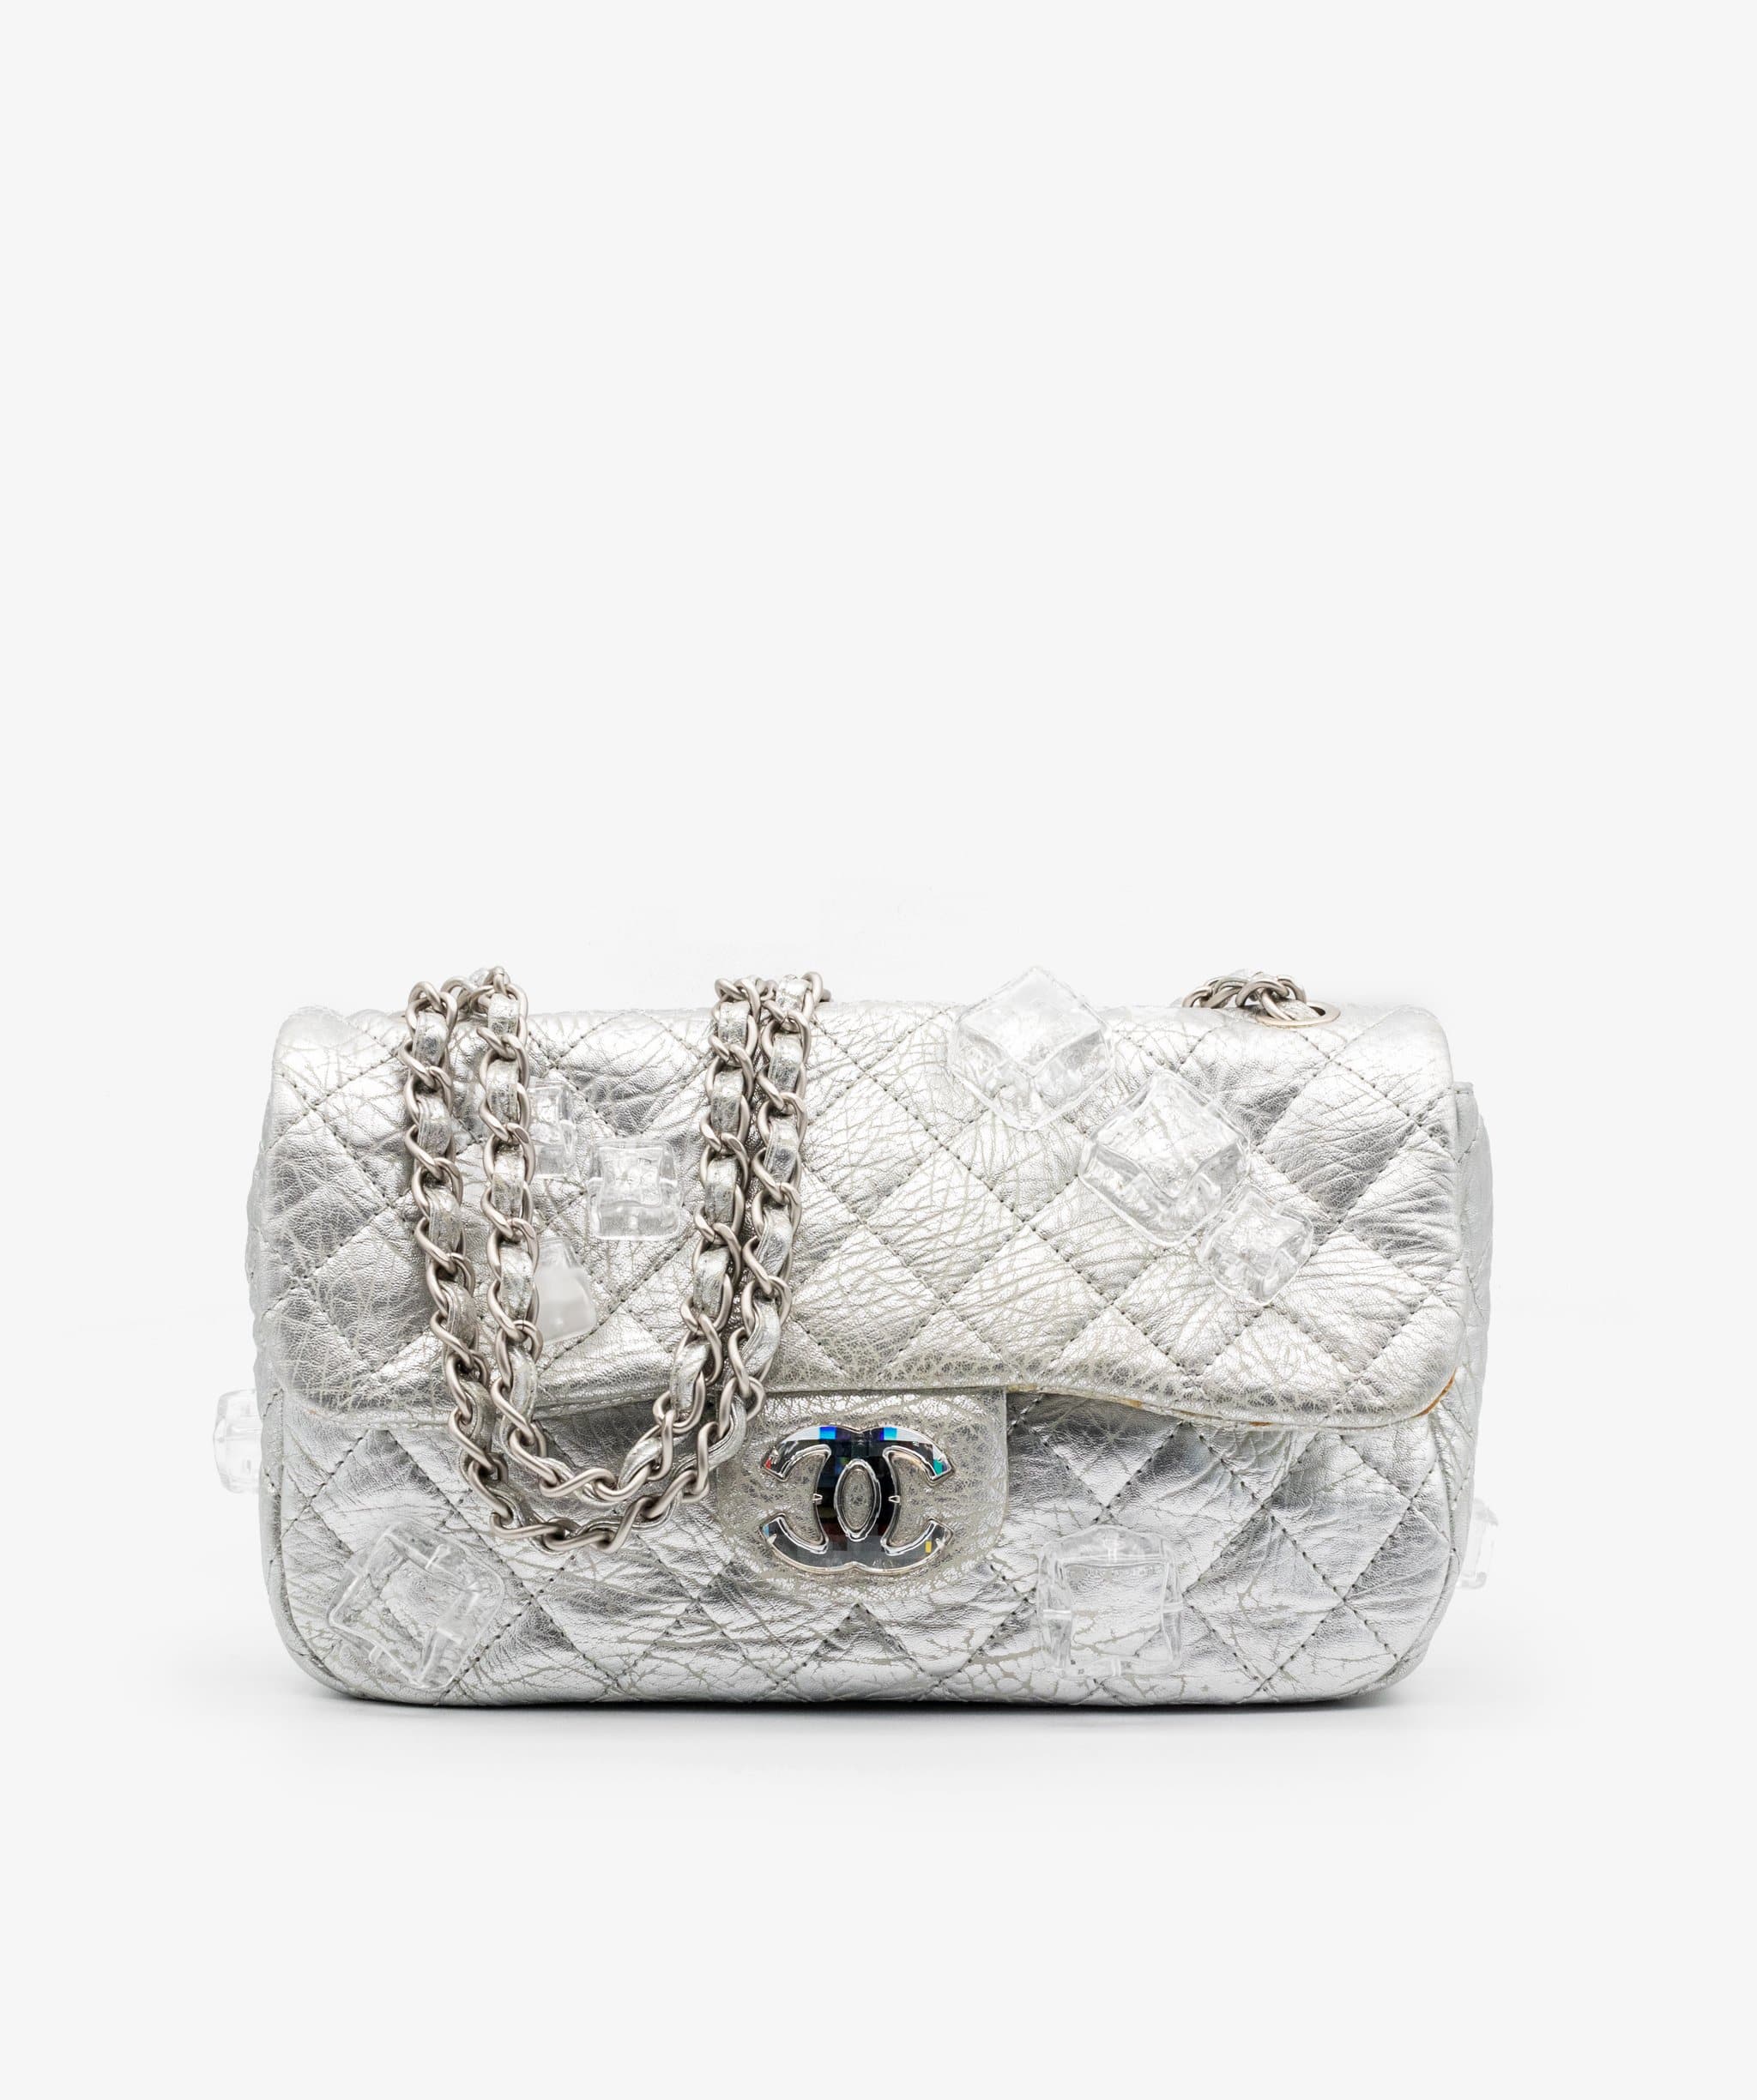 Chanel Chanel Classic Flap 2.55 Ice Cube On The Rocks Flapbag